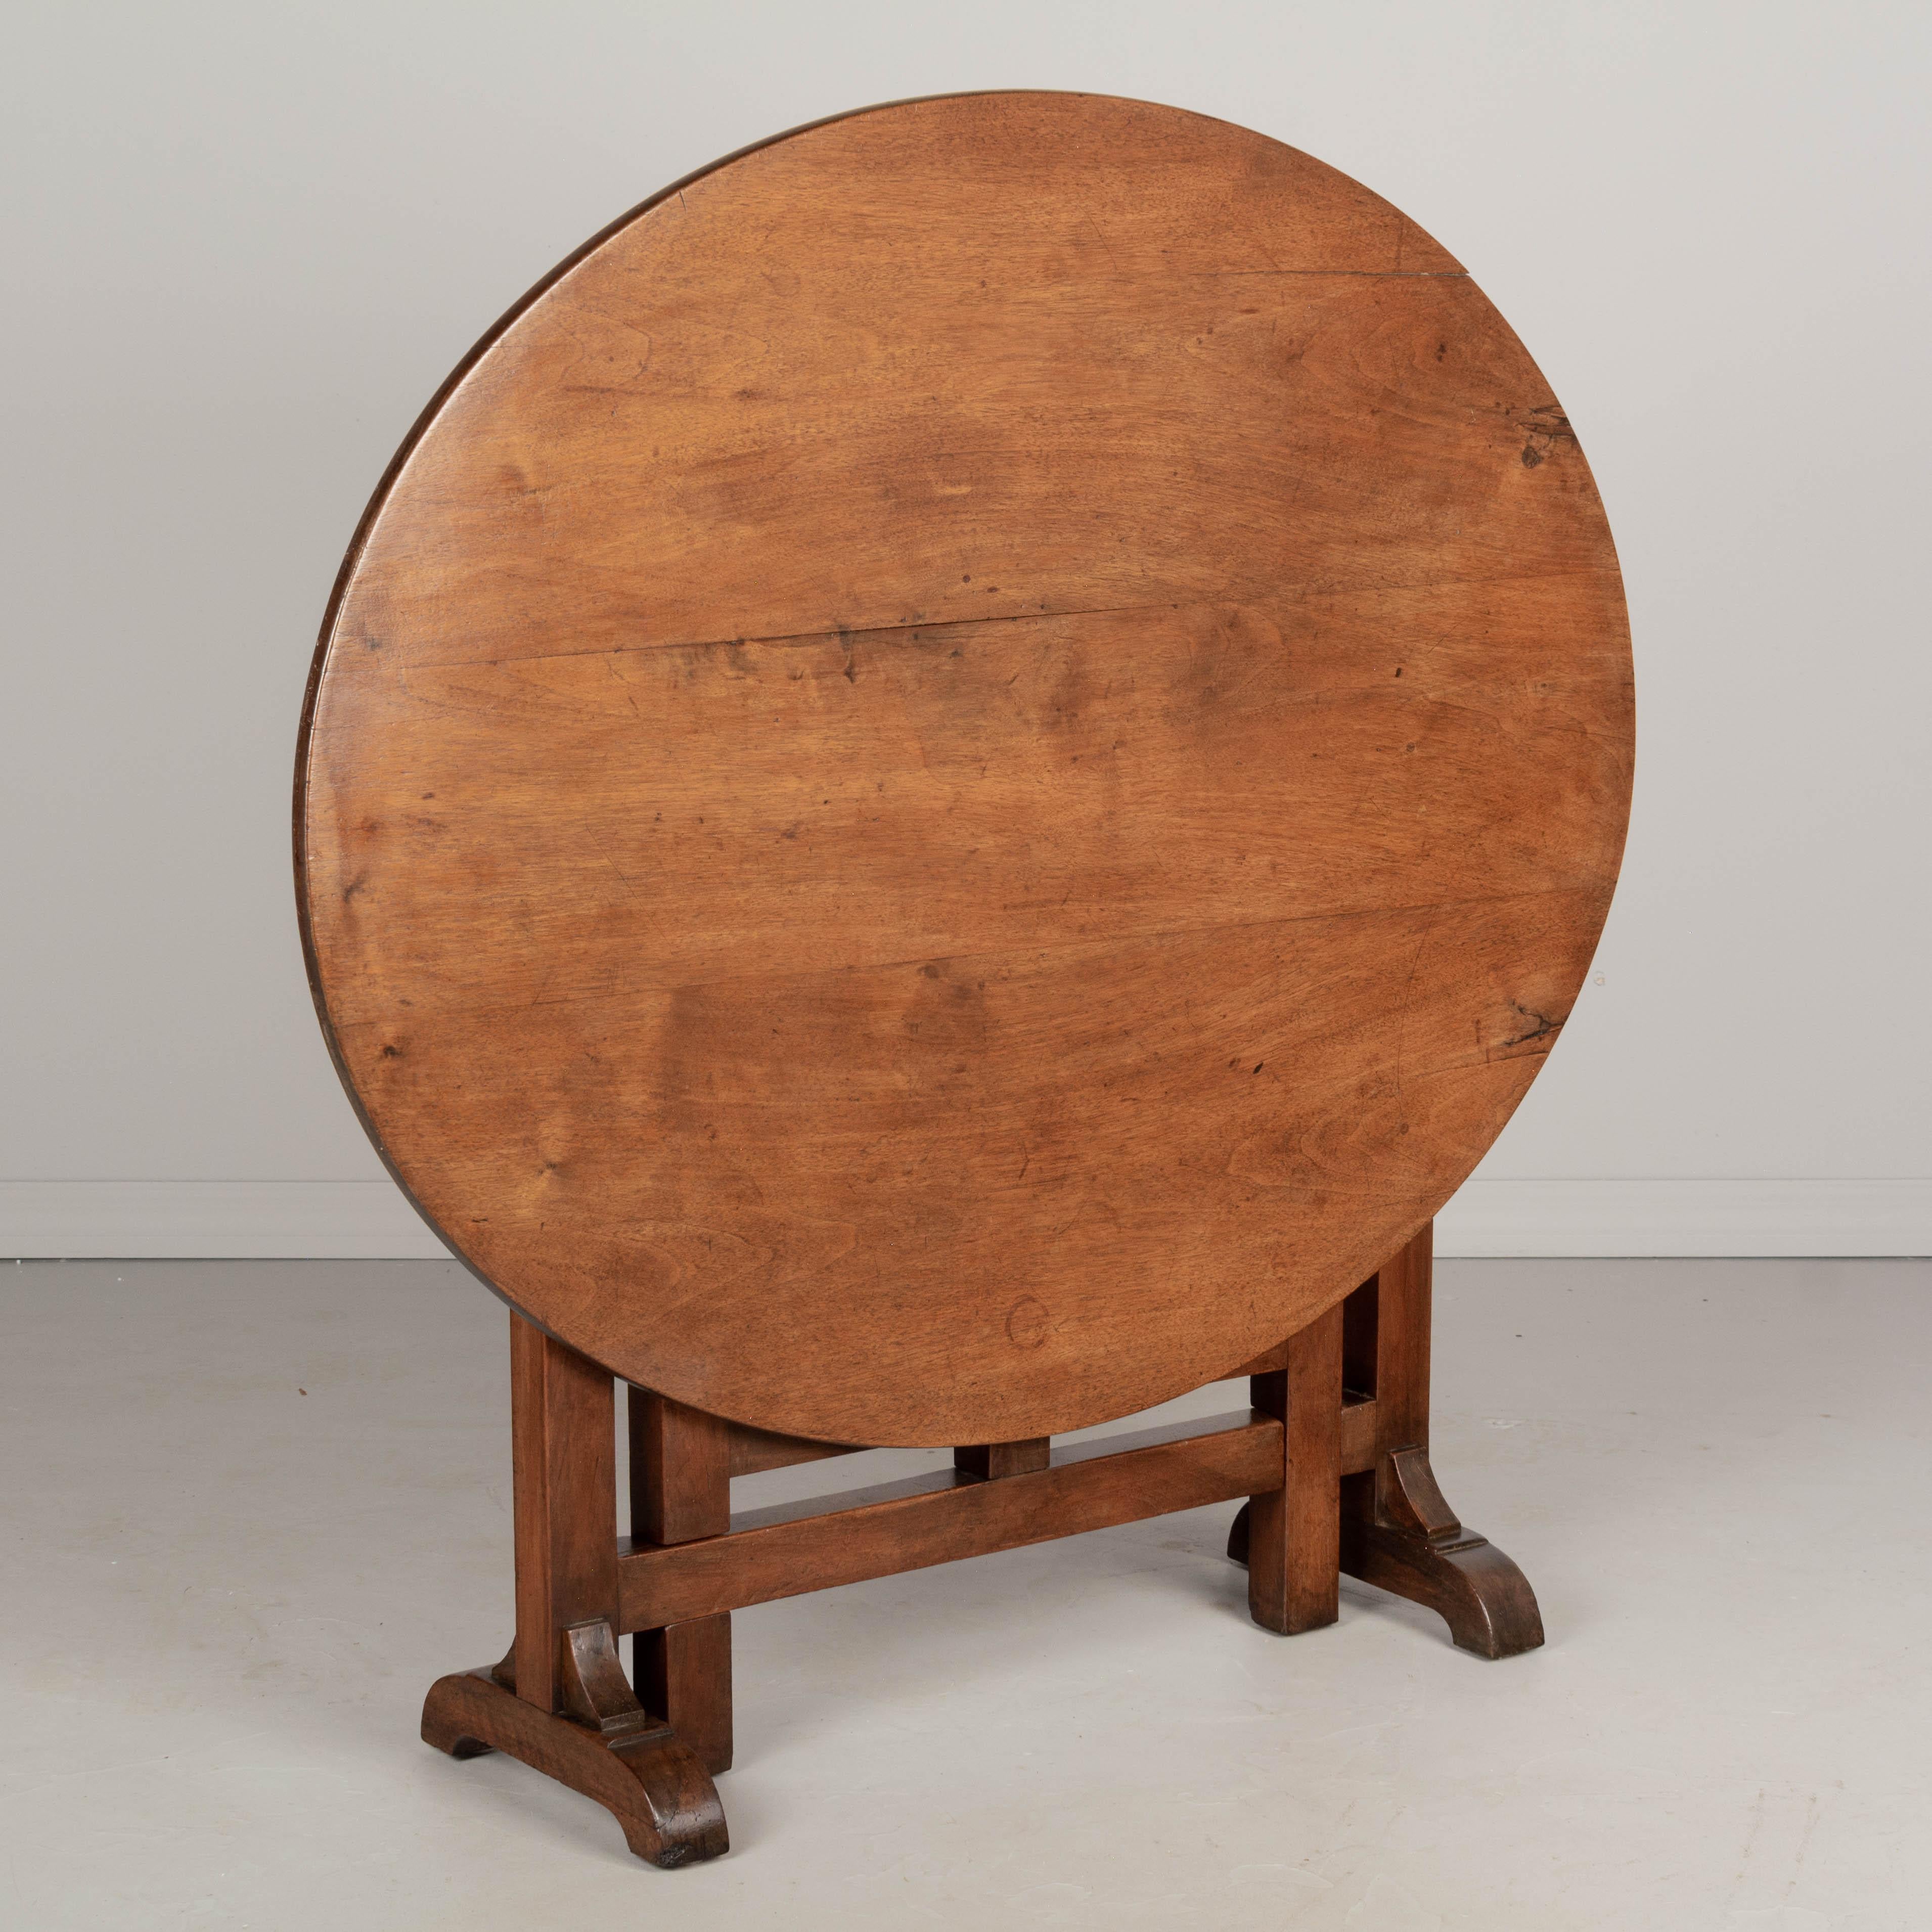 A 19th century French oval wine tasting, or tilt-top table made of solid walnut. The base is thick and sturdy. Well-crafted with mortise and tenon joints and pegged construction. Waxed finish. This table is a good height for use as a dining table